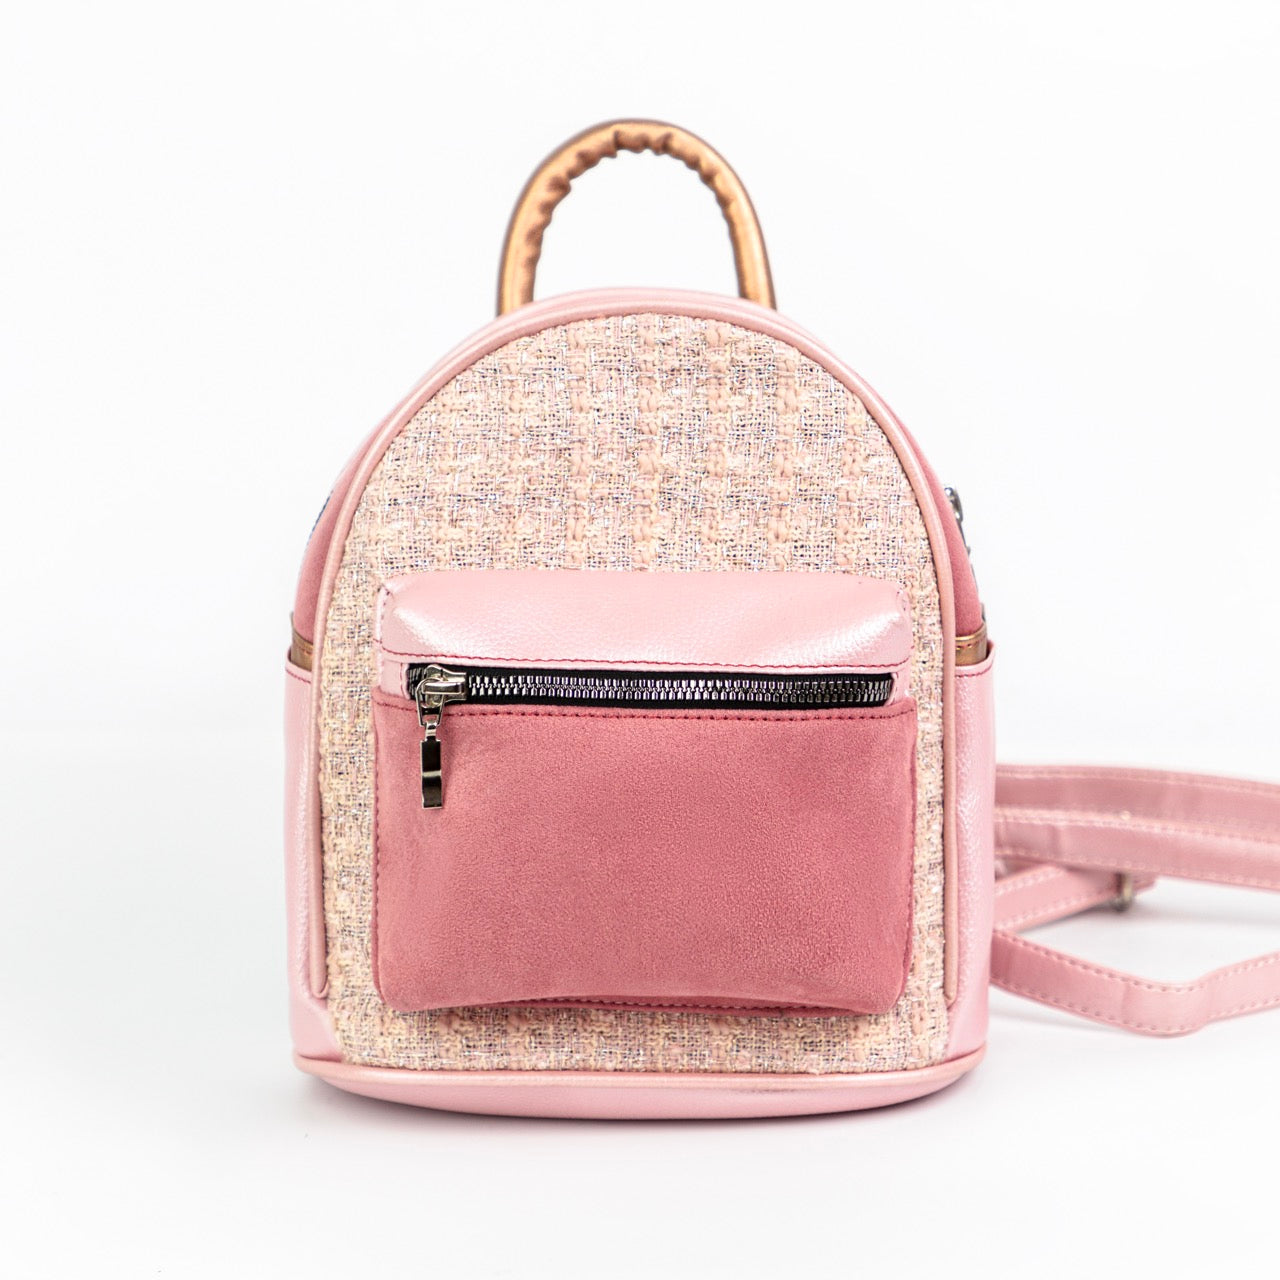 ngaos_tabby_milkyway_vegan_lether_tweed_small_backpack_pink